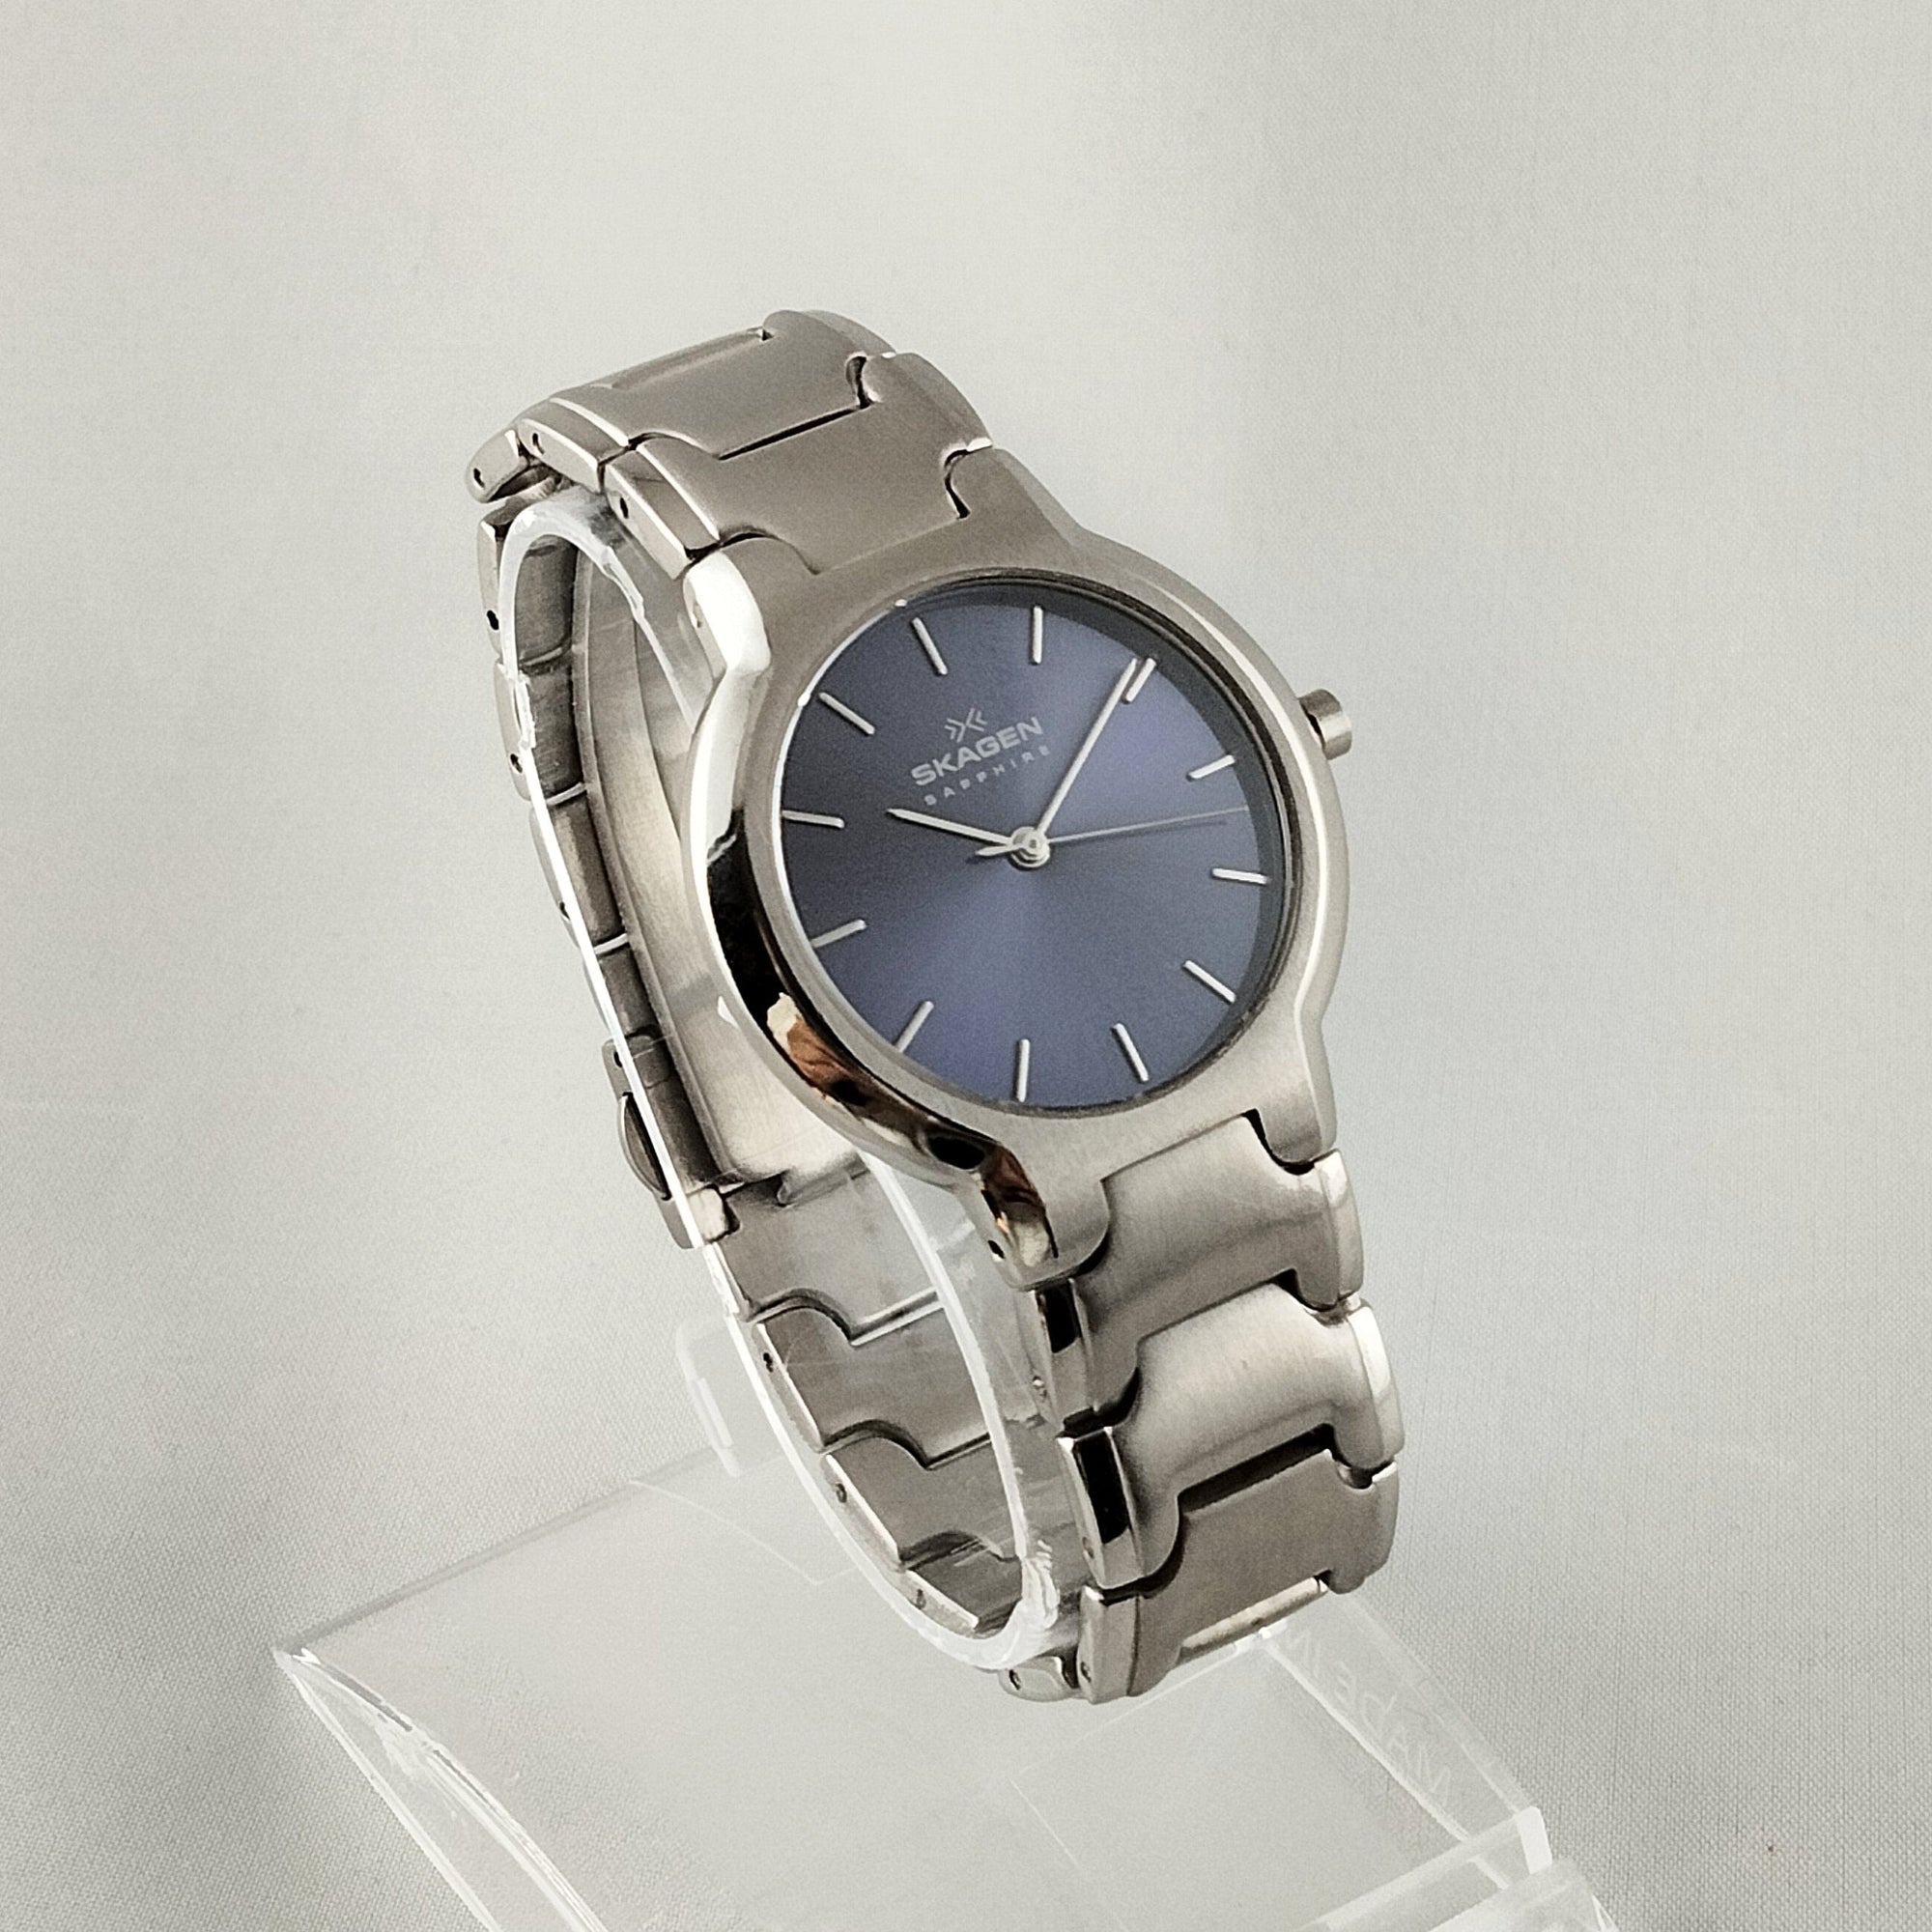 I Like Mikes Mid Century Modern Watches Skagen Stainless Steel Unisex Watch, Violet Dial, Bracelet Strap